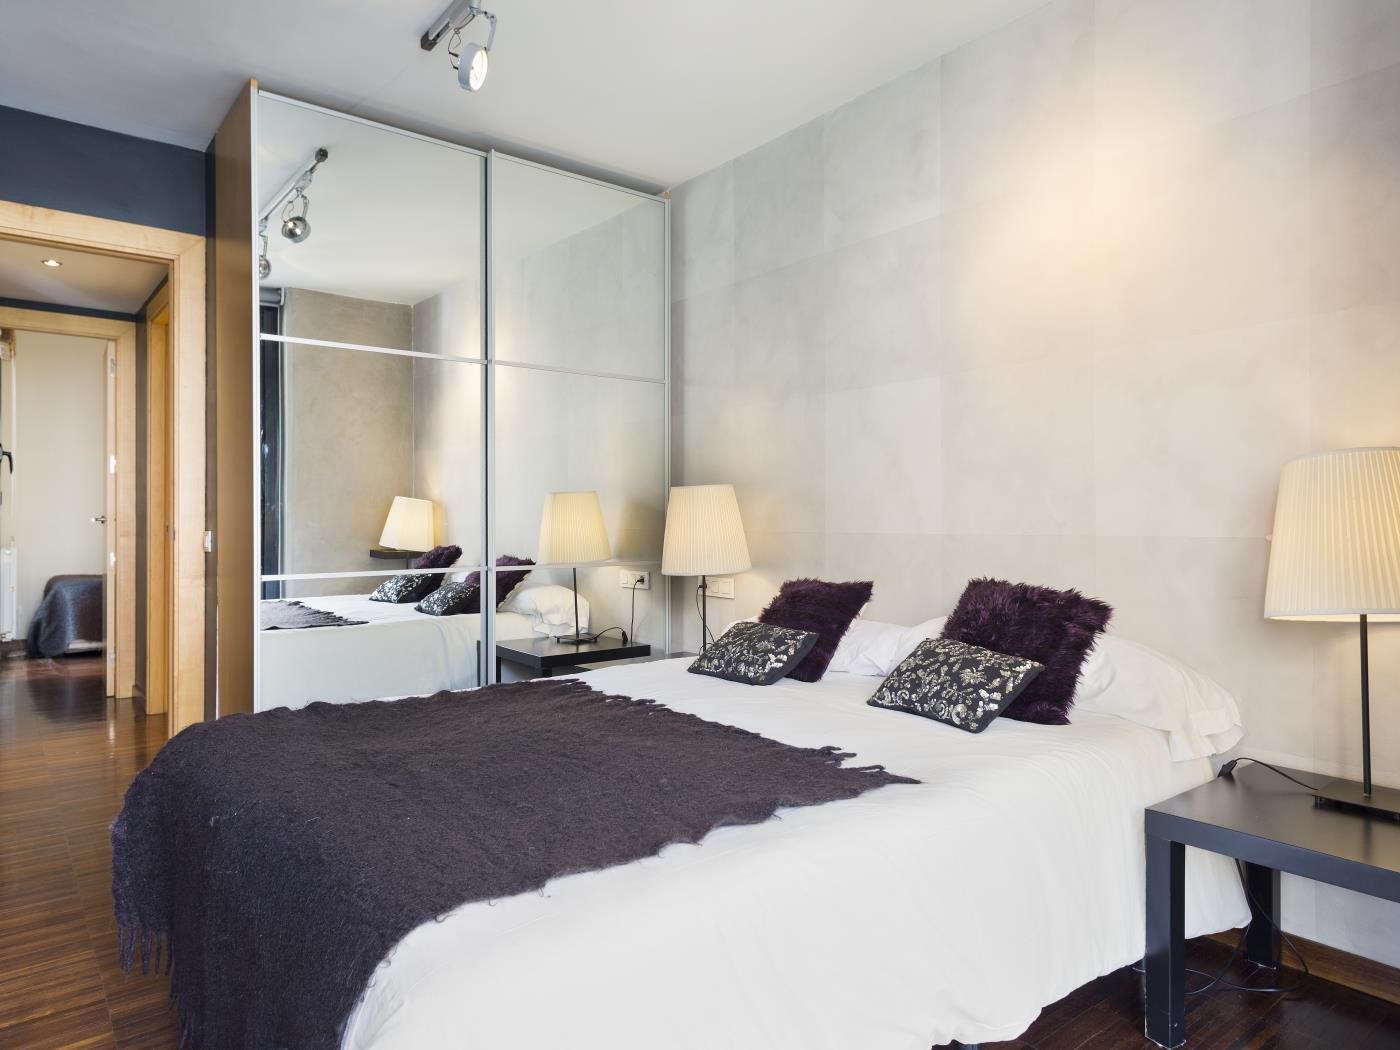 Executive Apartment in Sarrià – Pedralbes - My Space Barcelona Aпартаменты